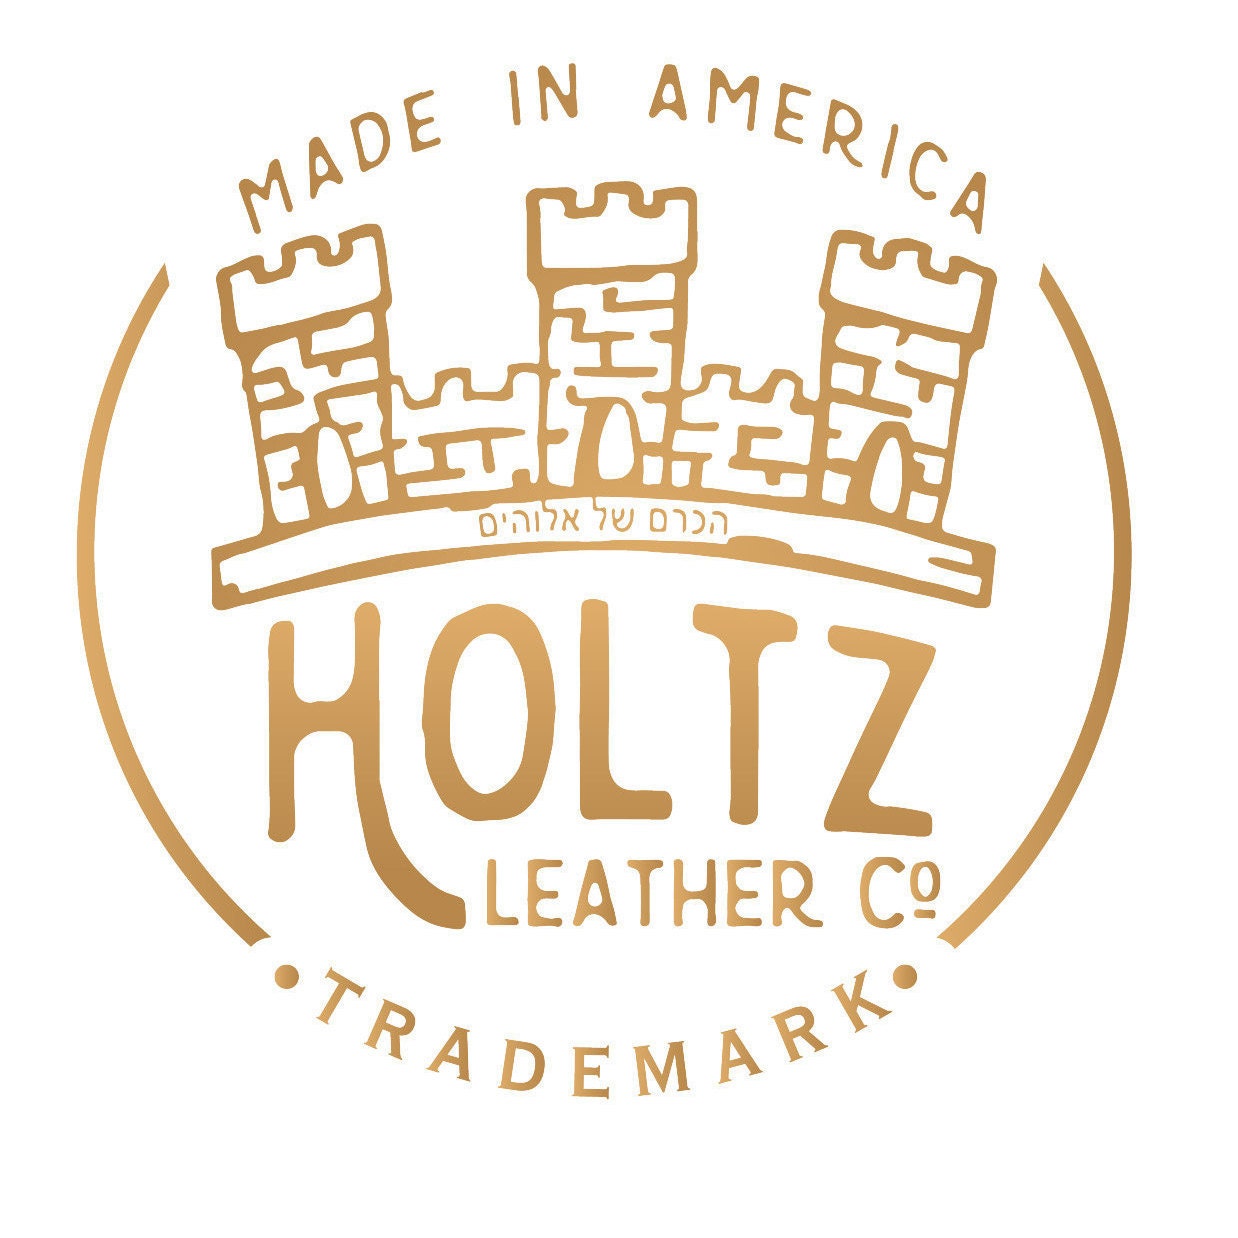 Mens Keyrings and Travel - Holtz Leather